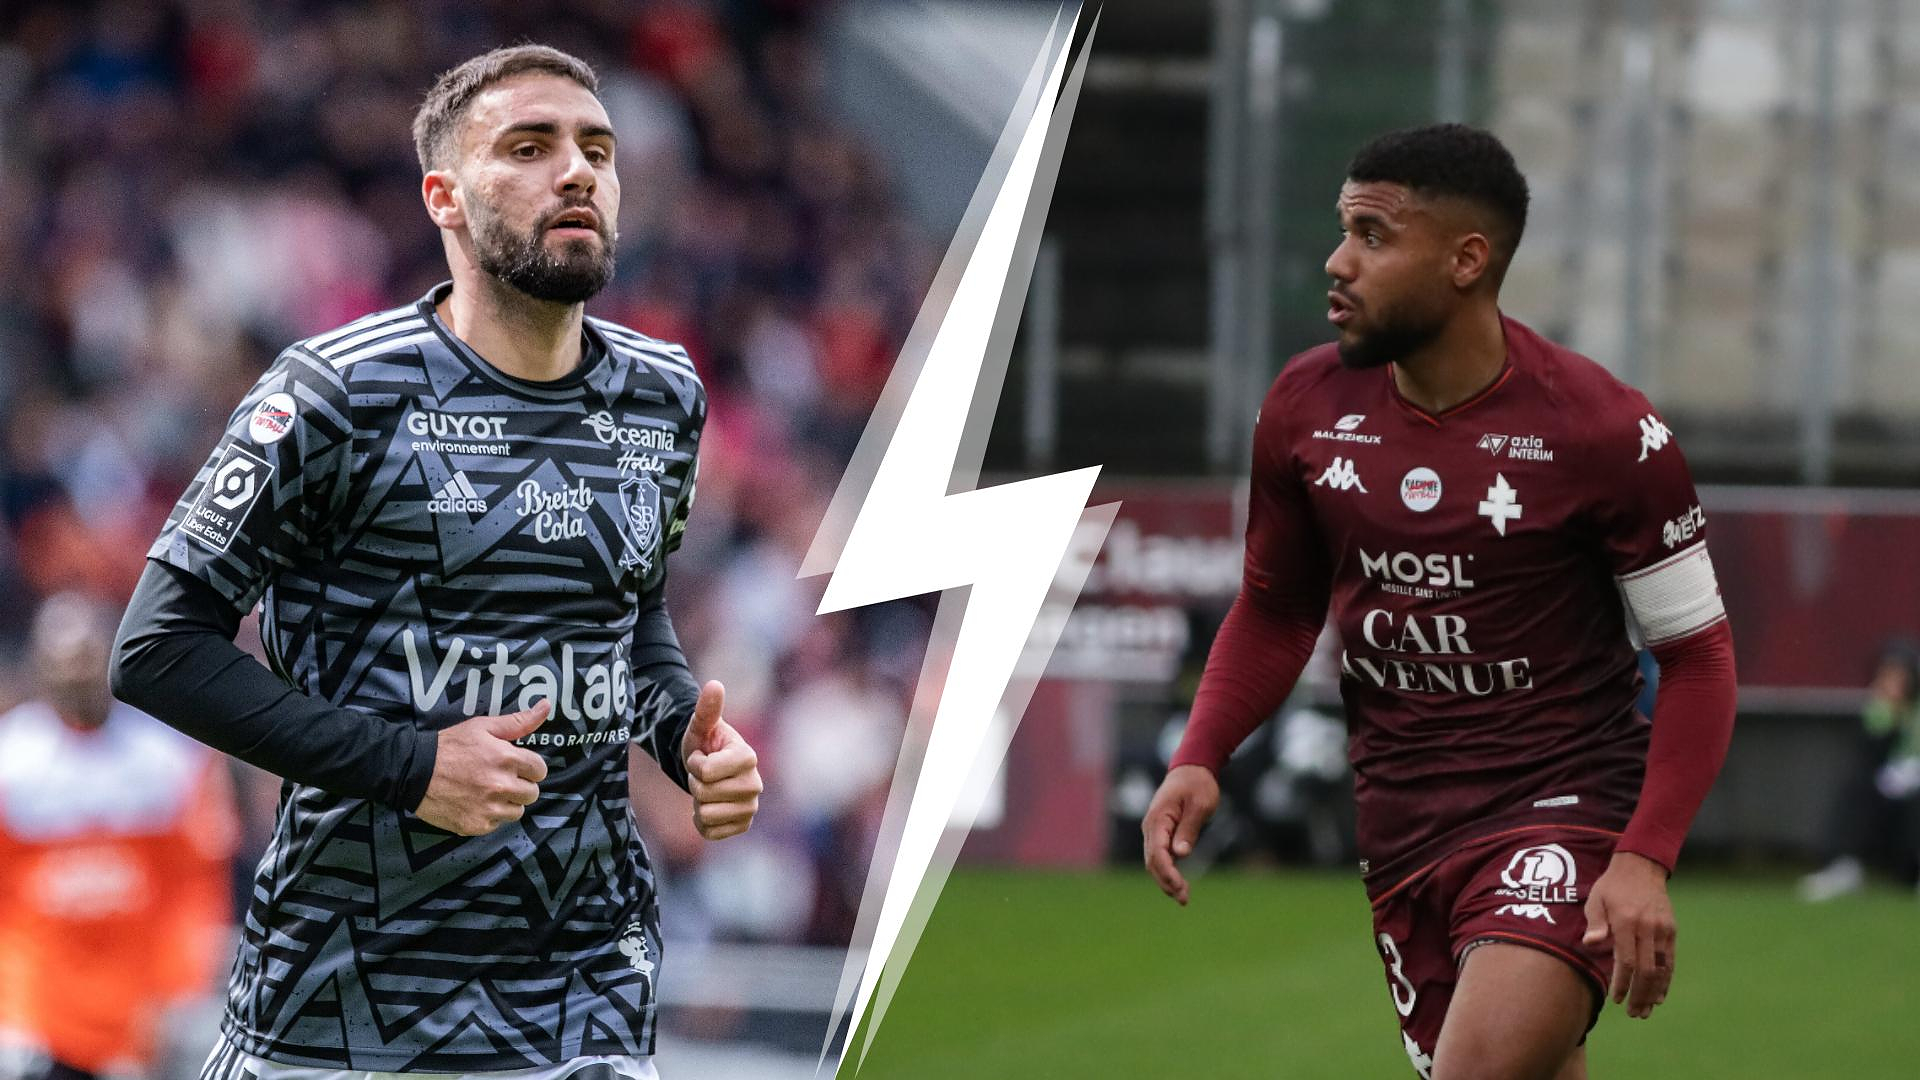 Ligue 1: at what time and on which channel to watch Brest-Metz?